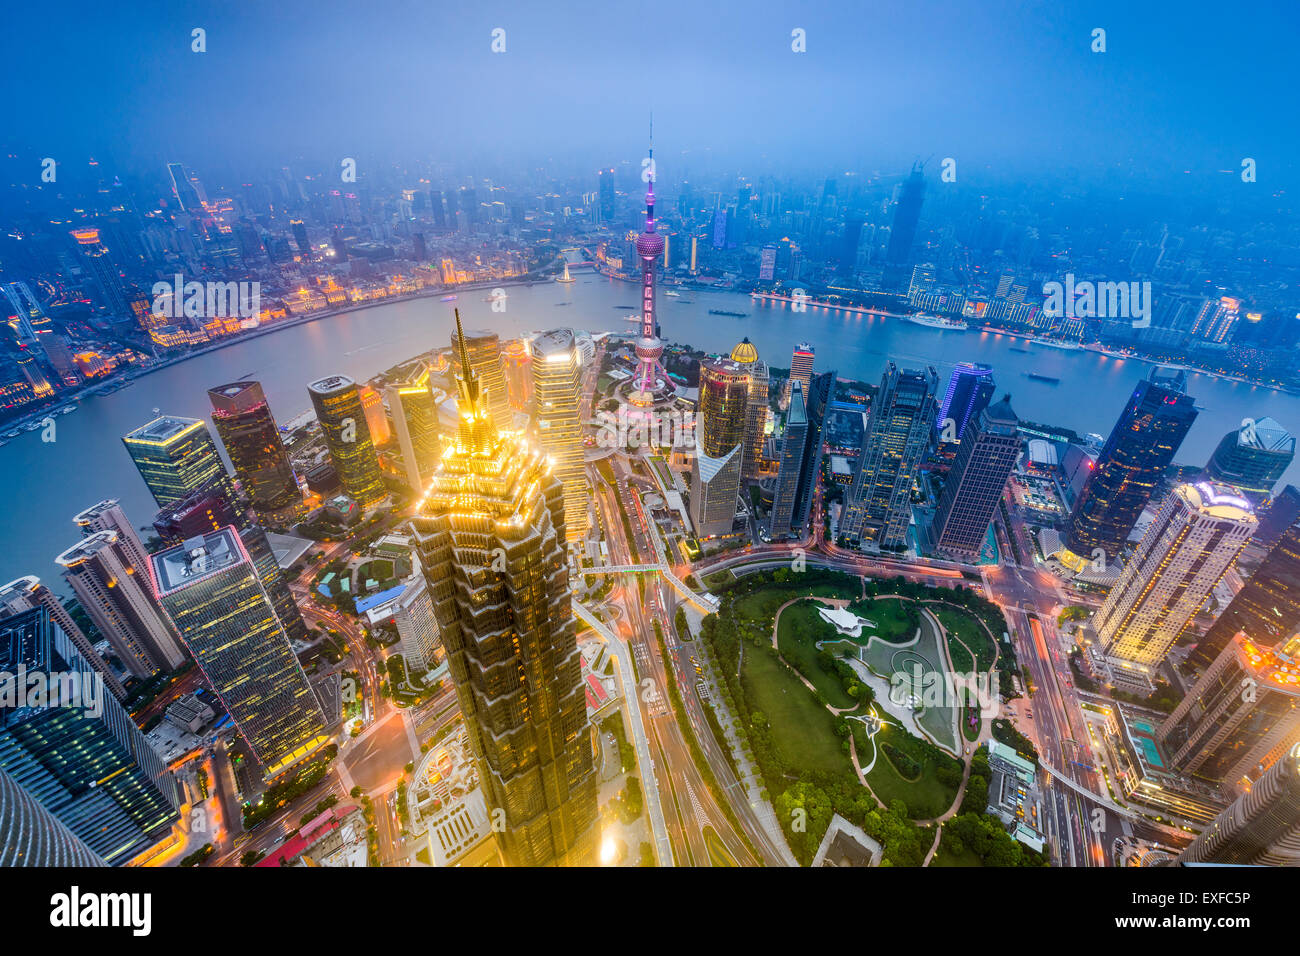 Shanghai, China downtown city skyline over Lujiazui District. Stock Photo